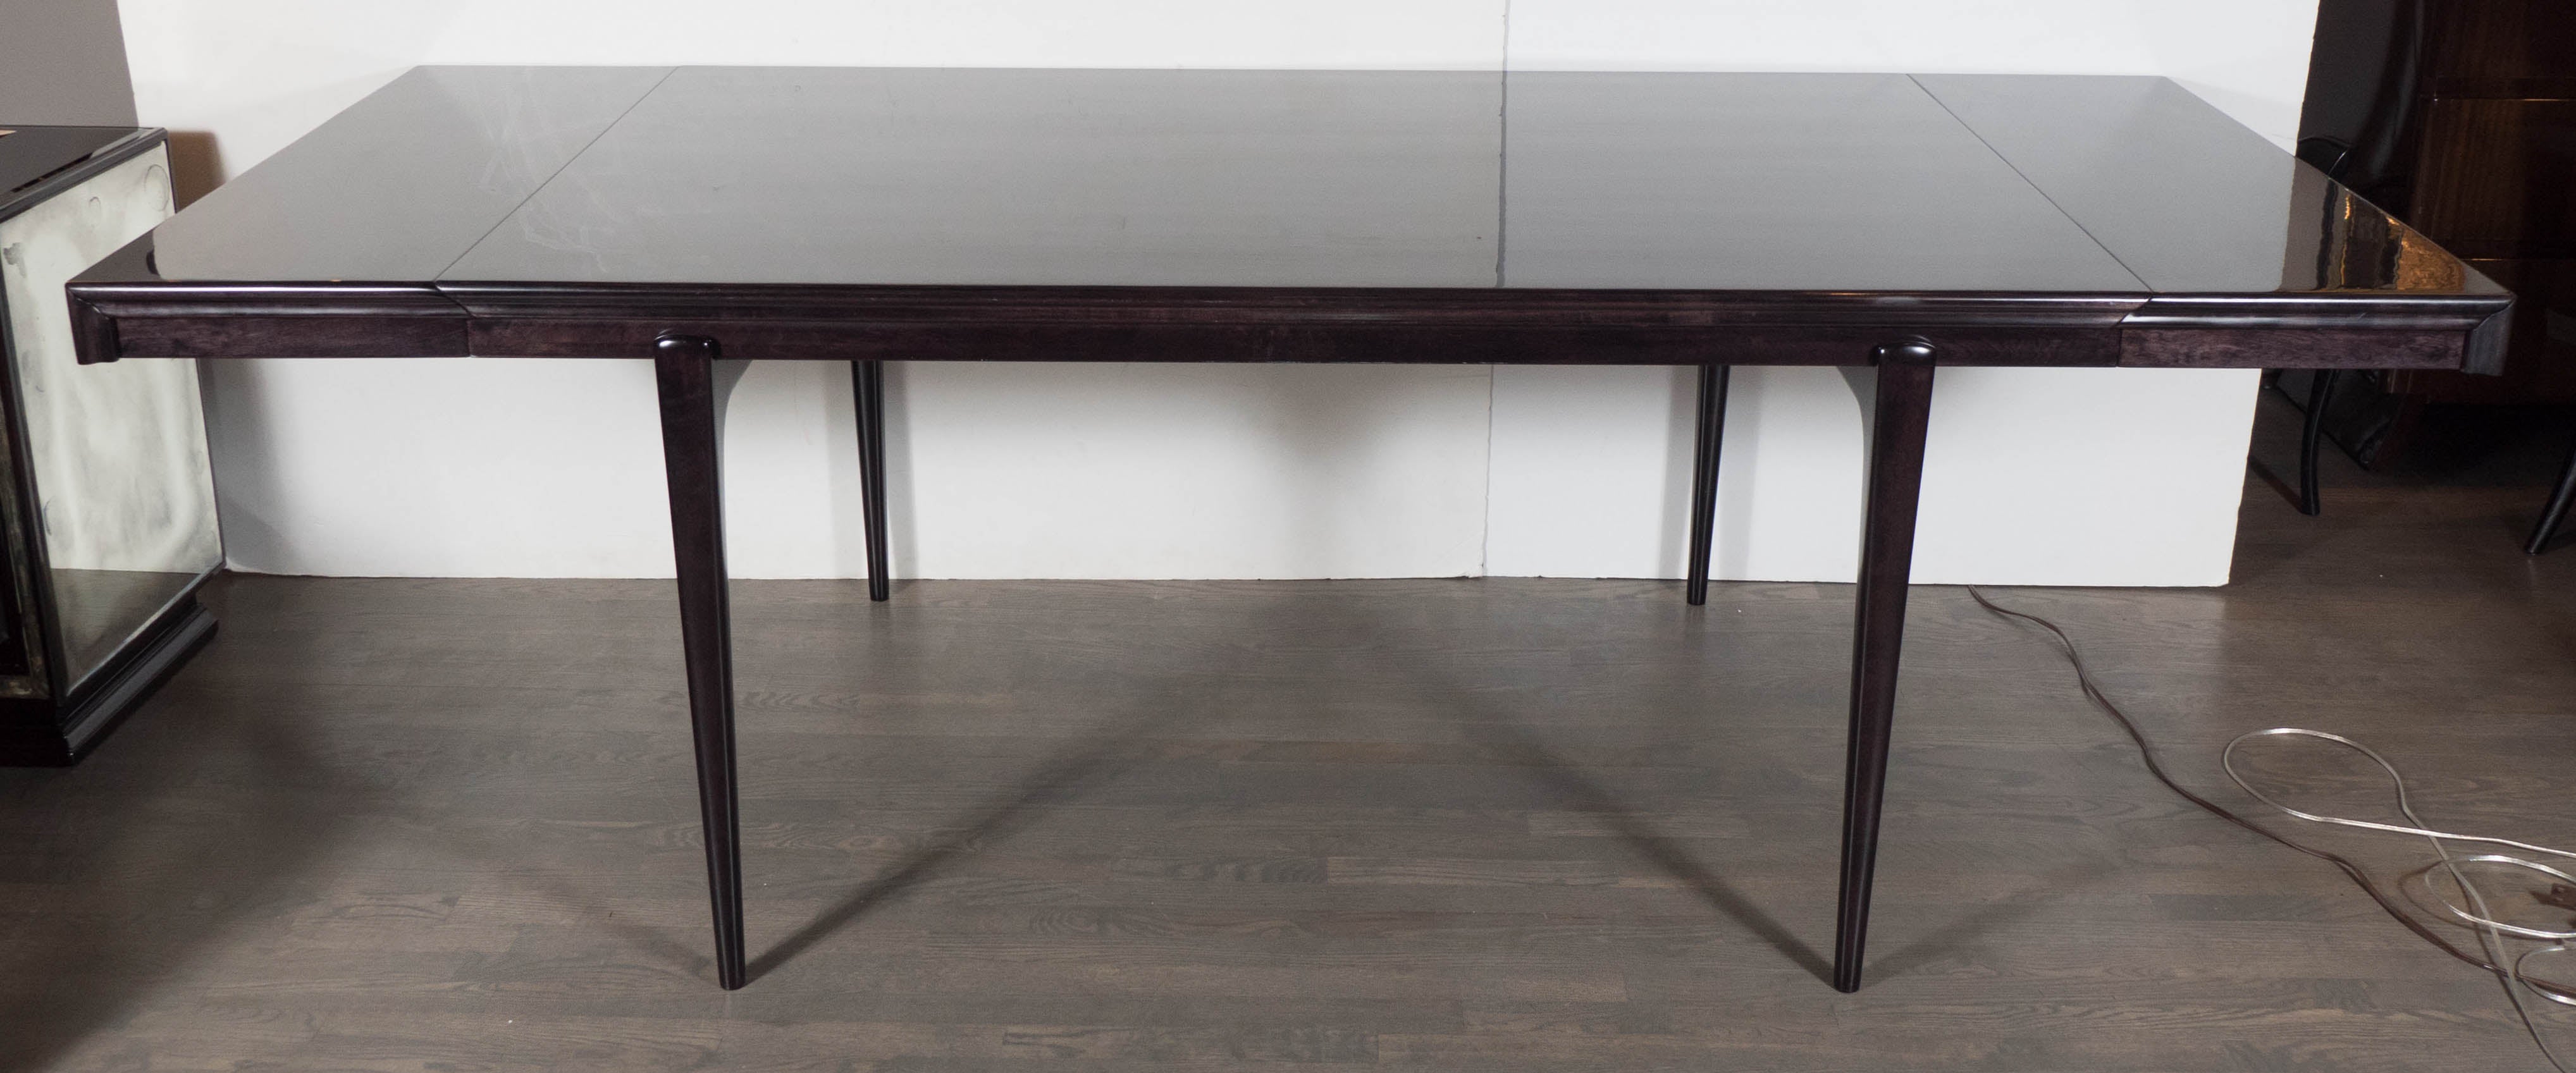 Ultra Chic Mid-Century Modernist Extension Dining Table by Edmond Spence